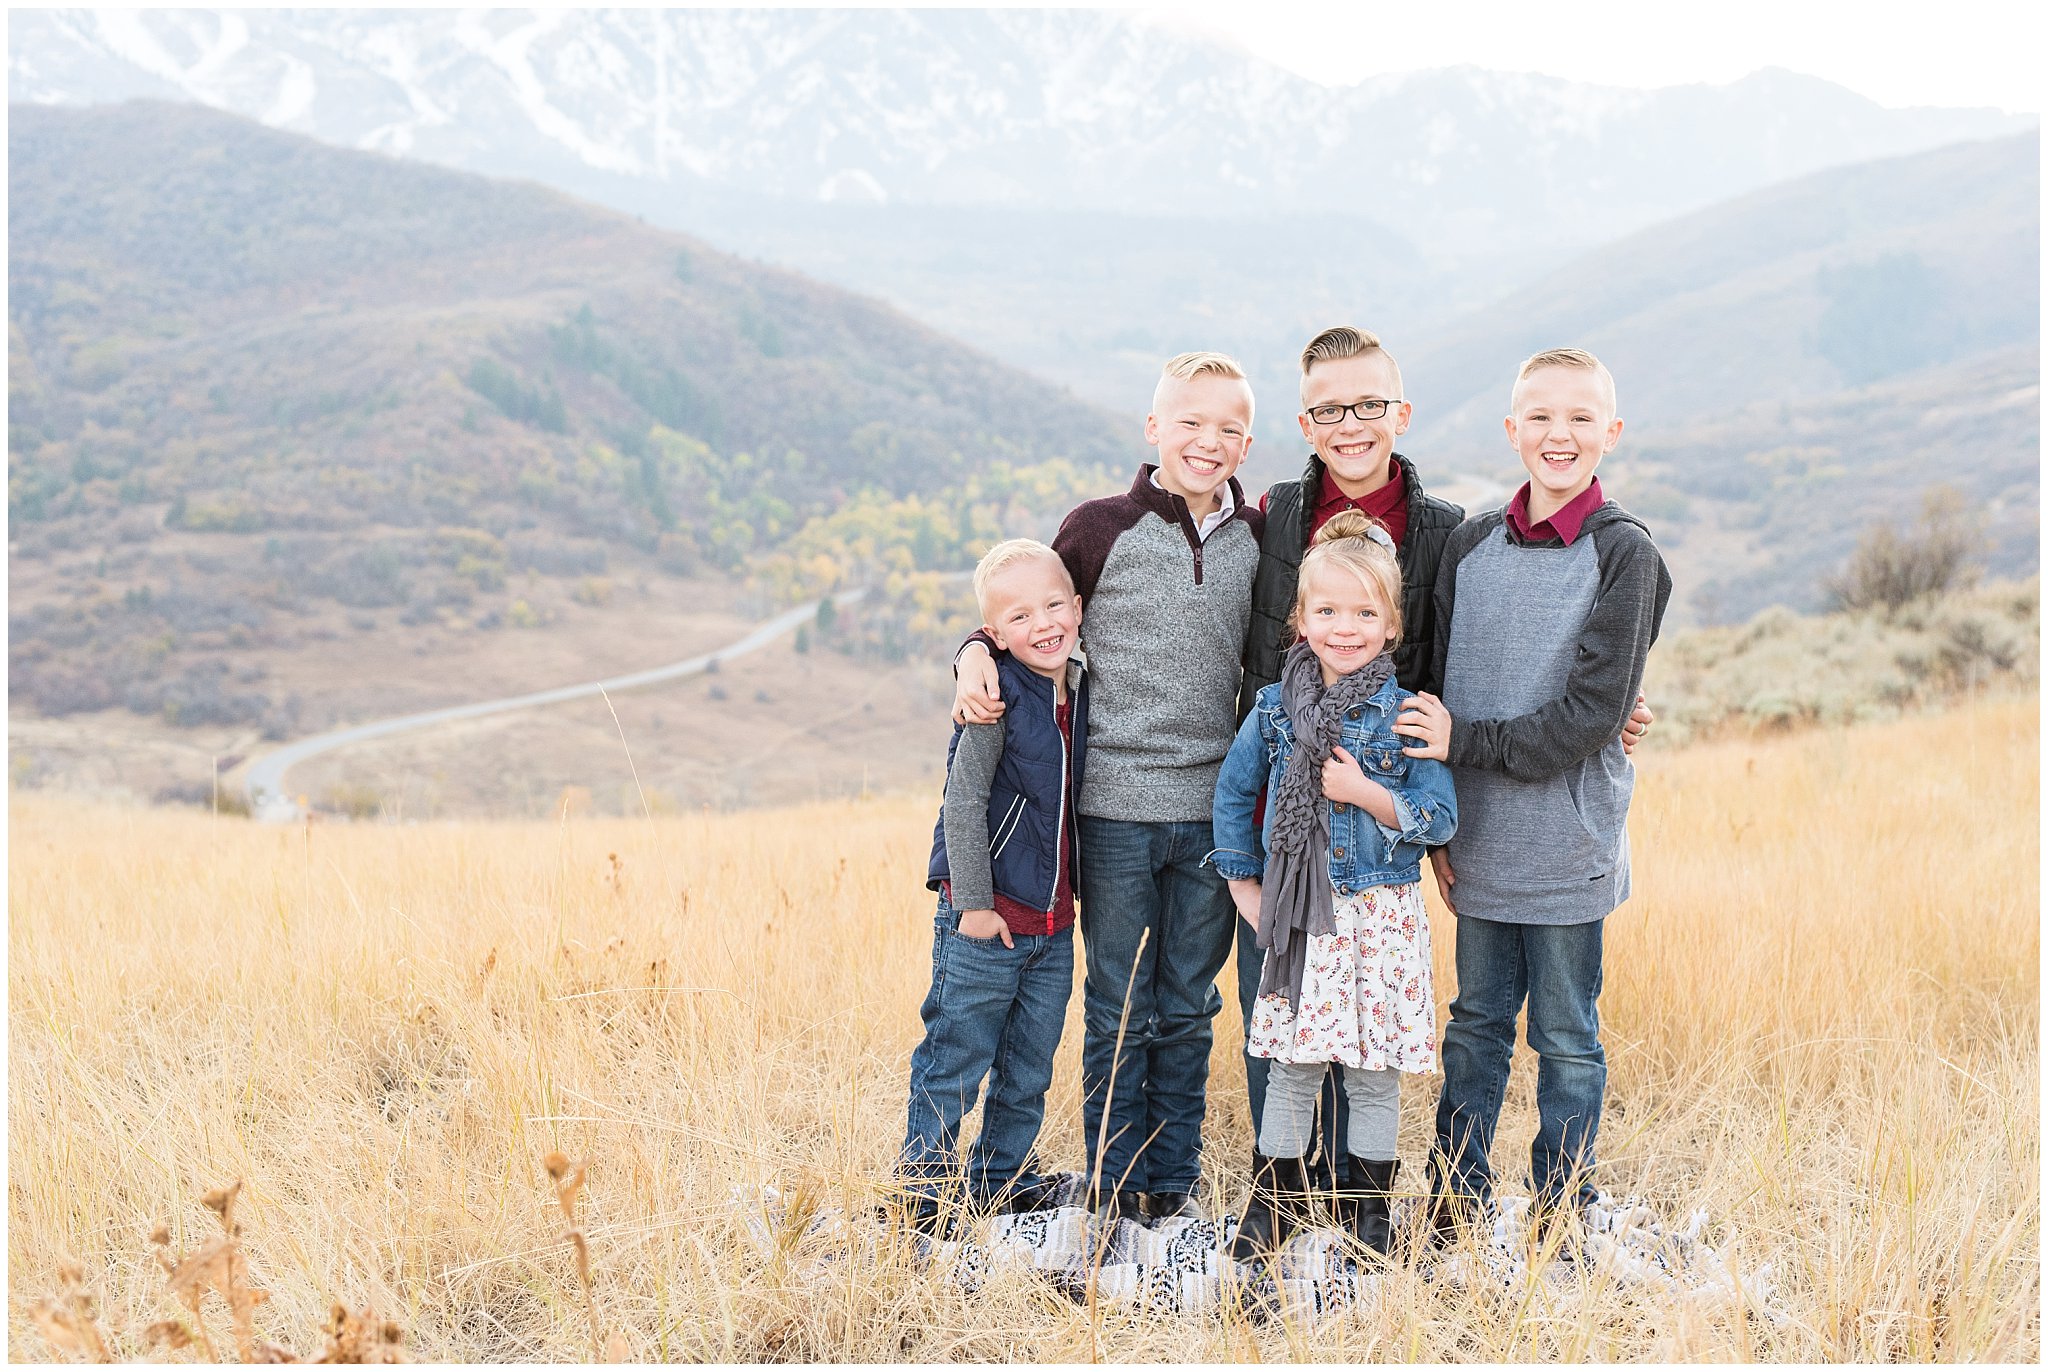 Candid siblings laughing in front of snowy mountains | Fall Family Pictures in the Mountains | Snowbasin, Utah | Jessie and Dallin Photography